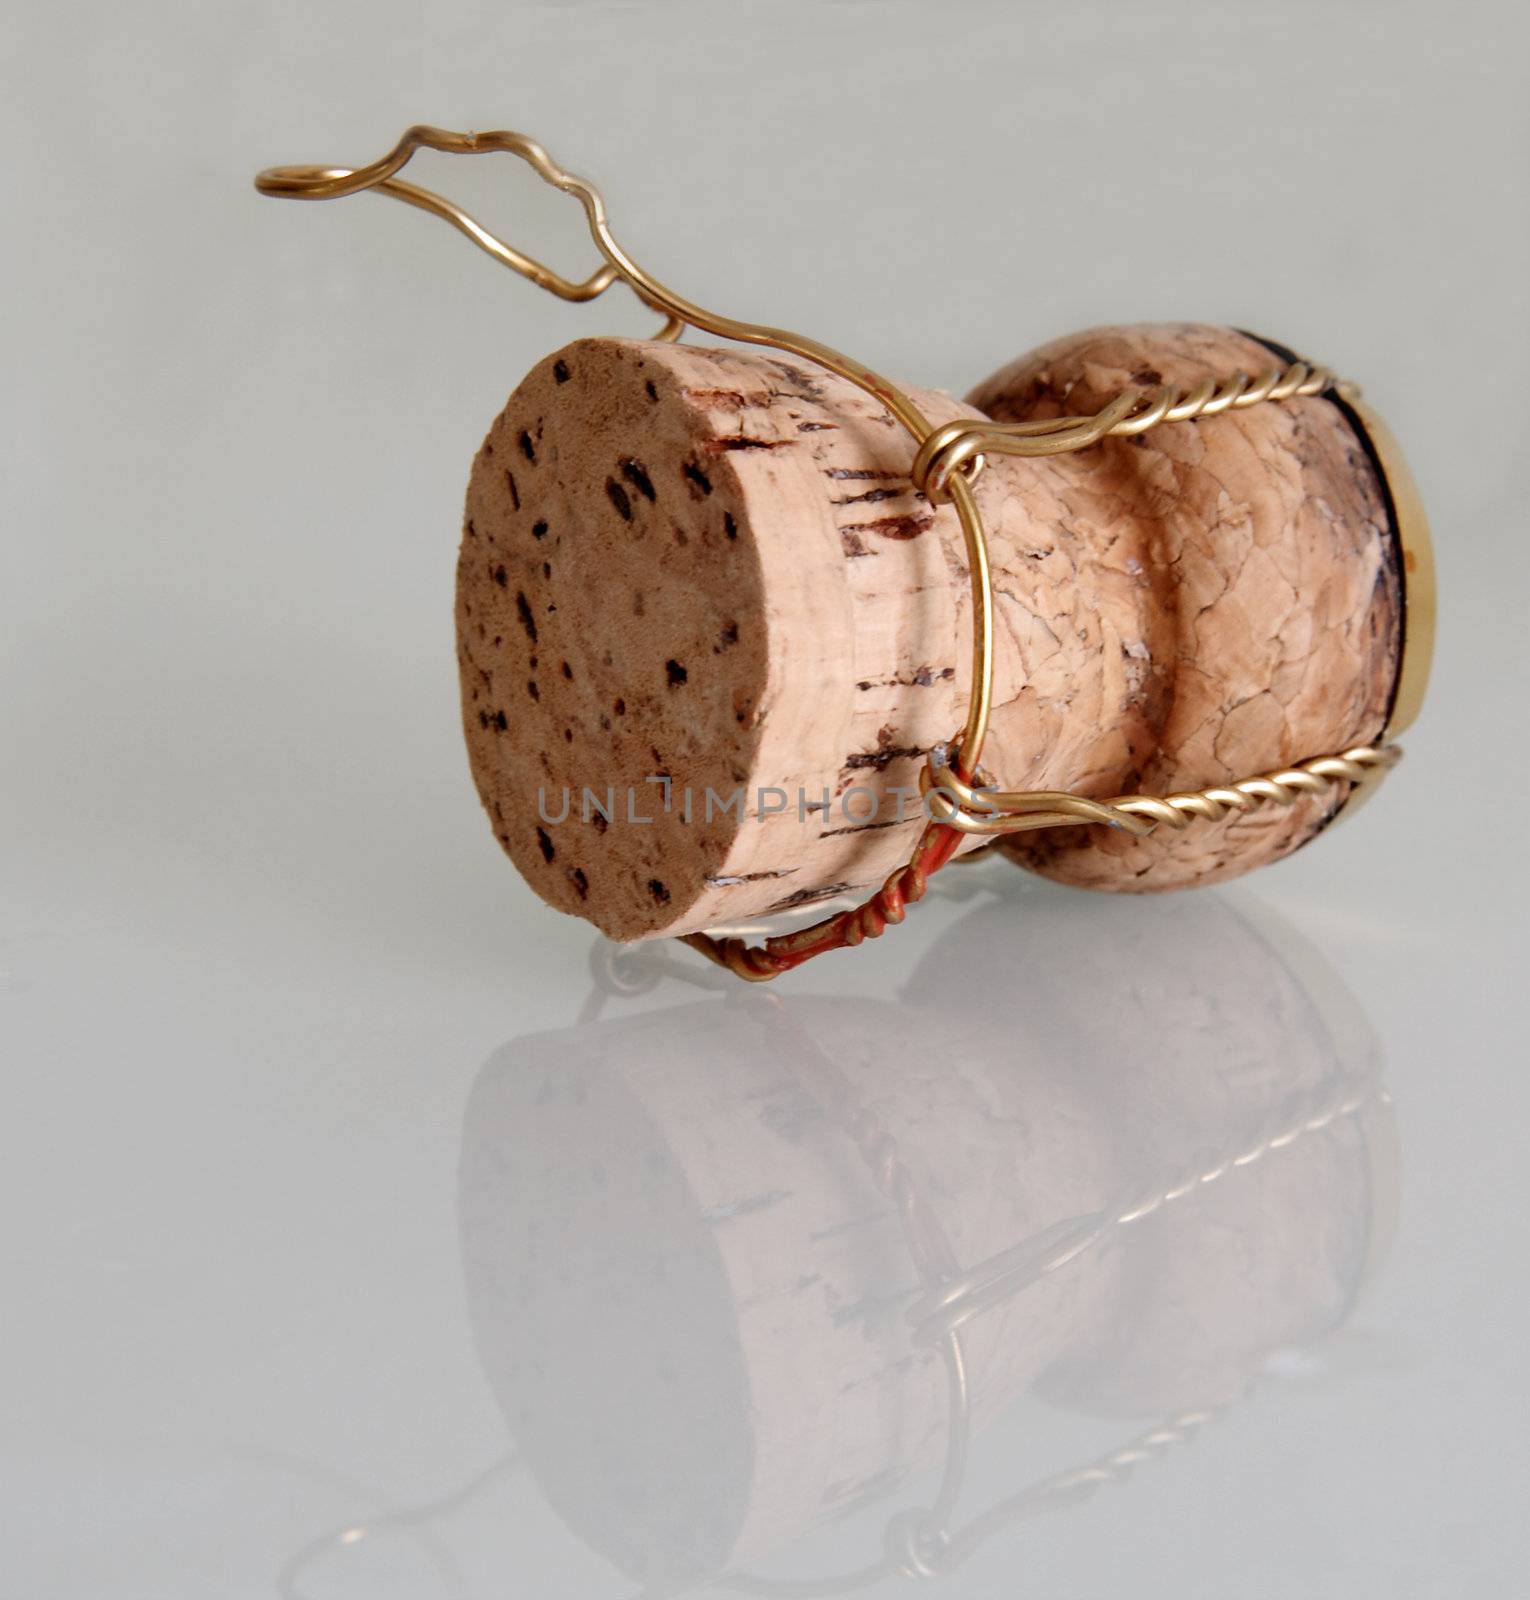 Champagne cork with reflection on grey